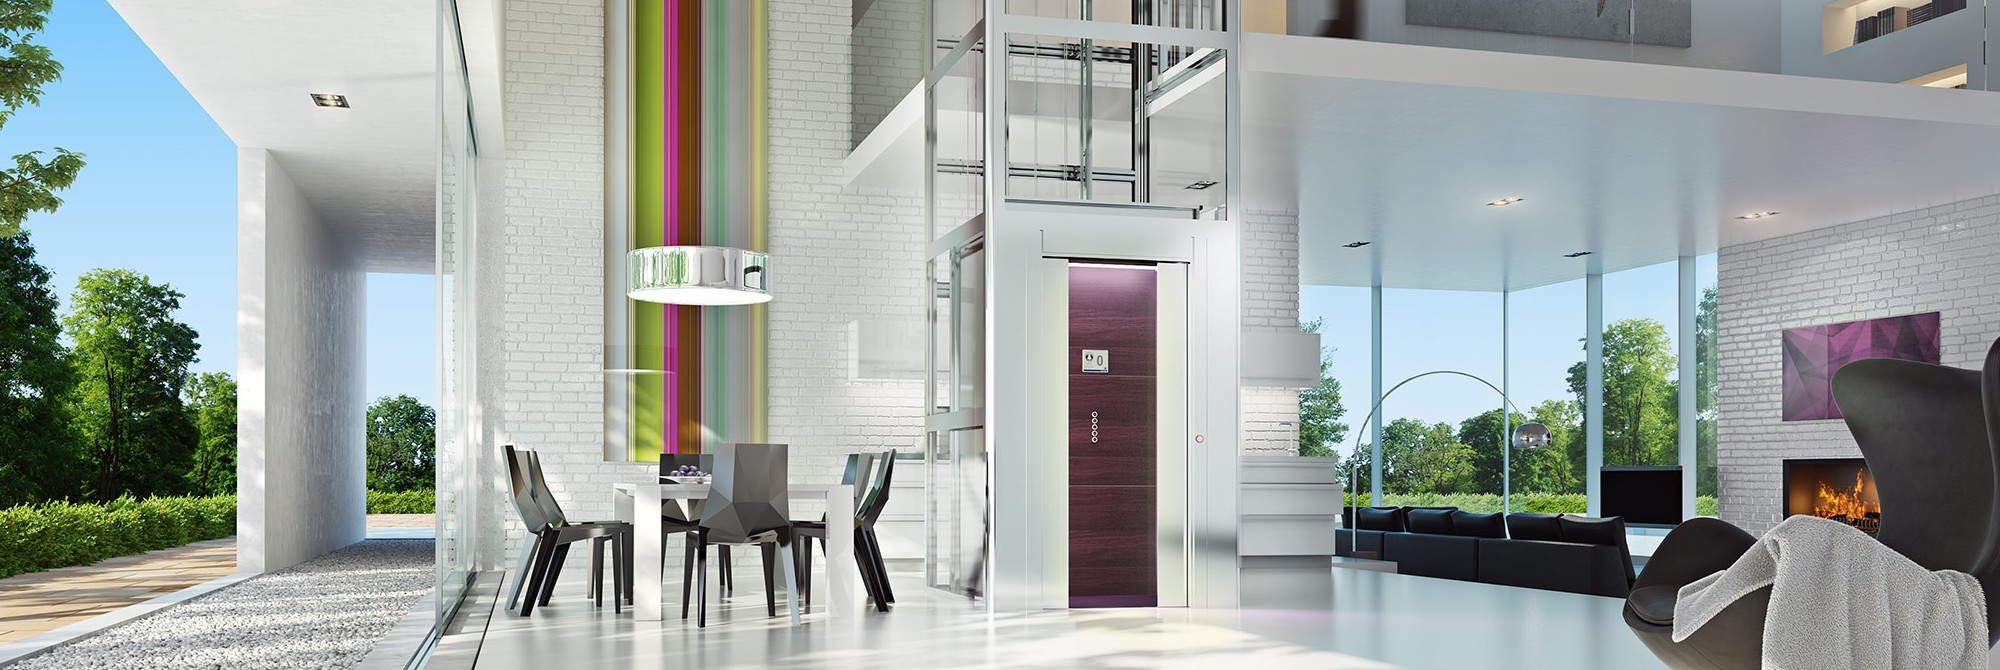 thyssenkrupp Elevator Technology | Home solutions - accesibility